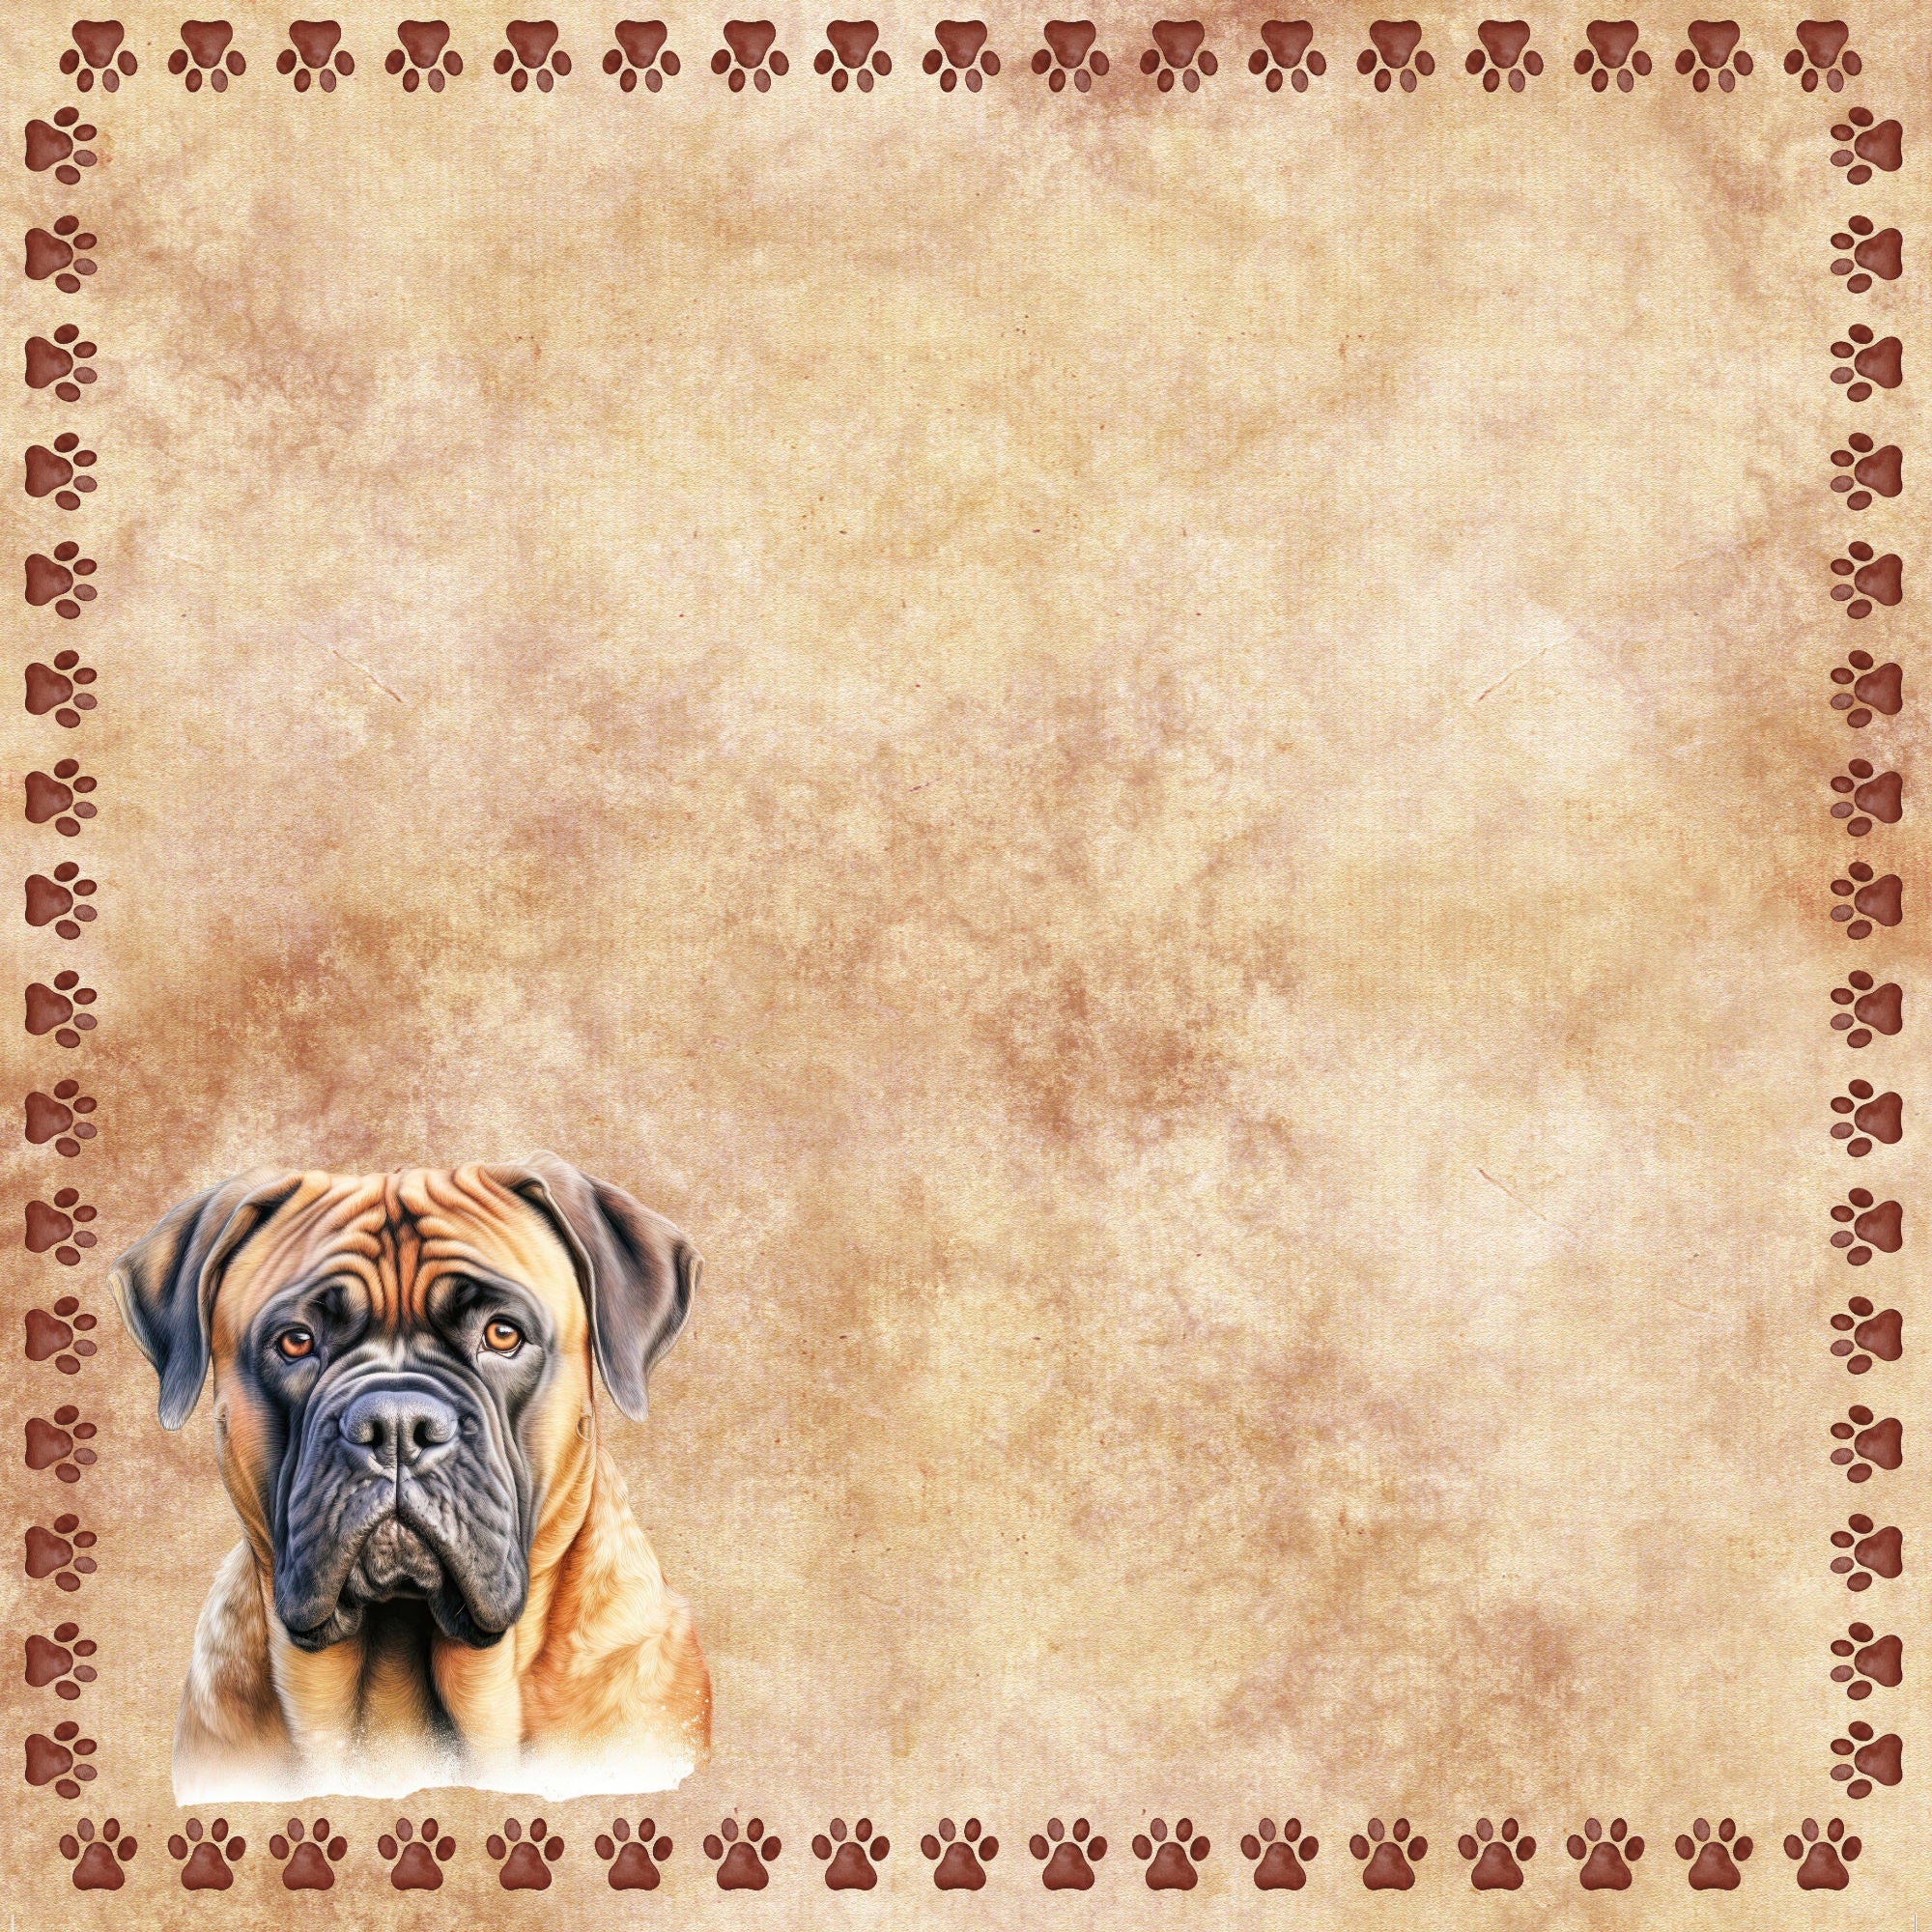 Dog Breeds Collection Bullmastiff 12 x 12 Double-Sided Scrapbook Paper by SSC Designs